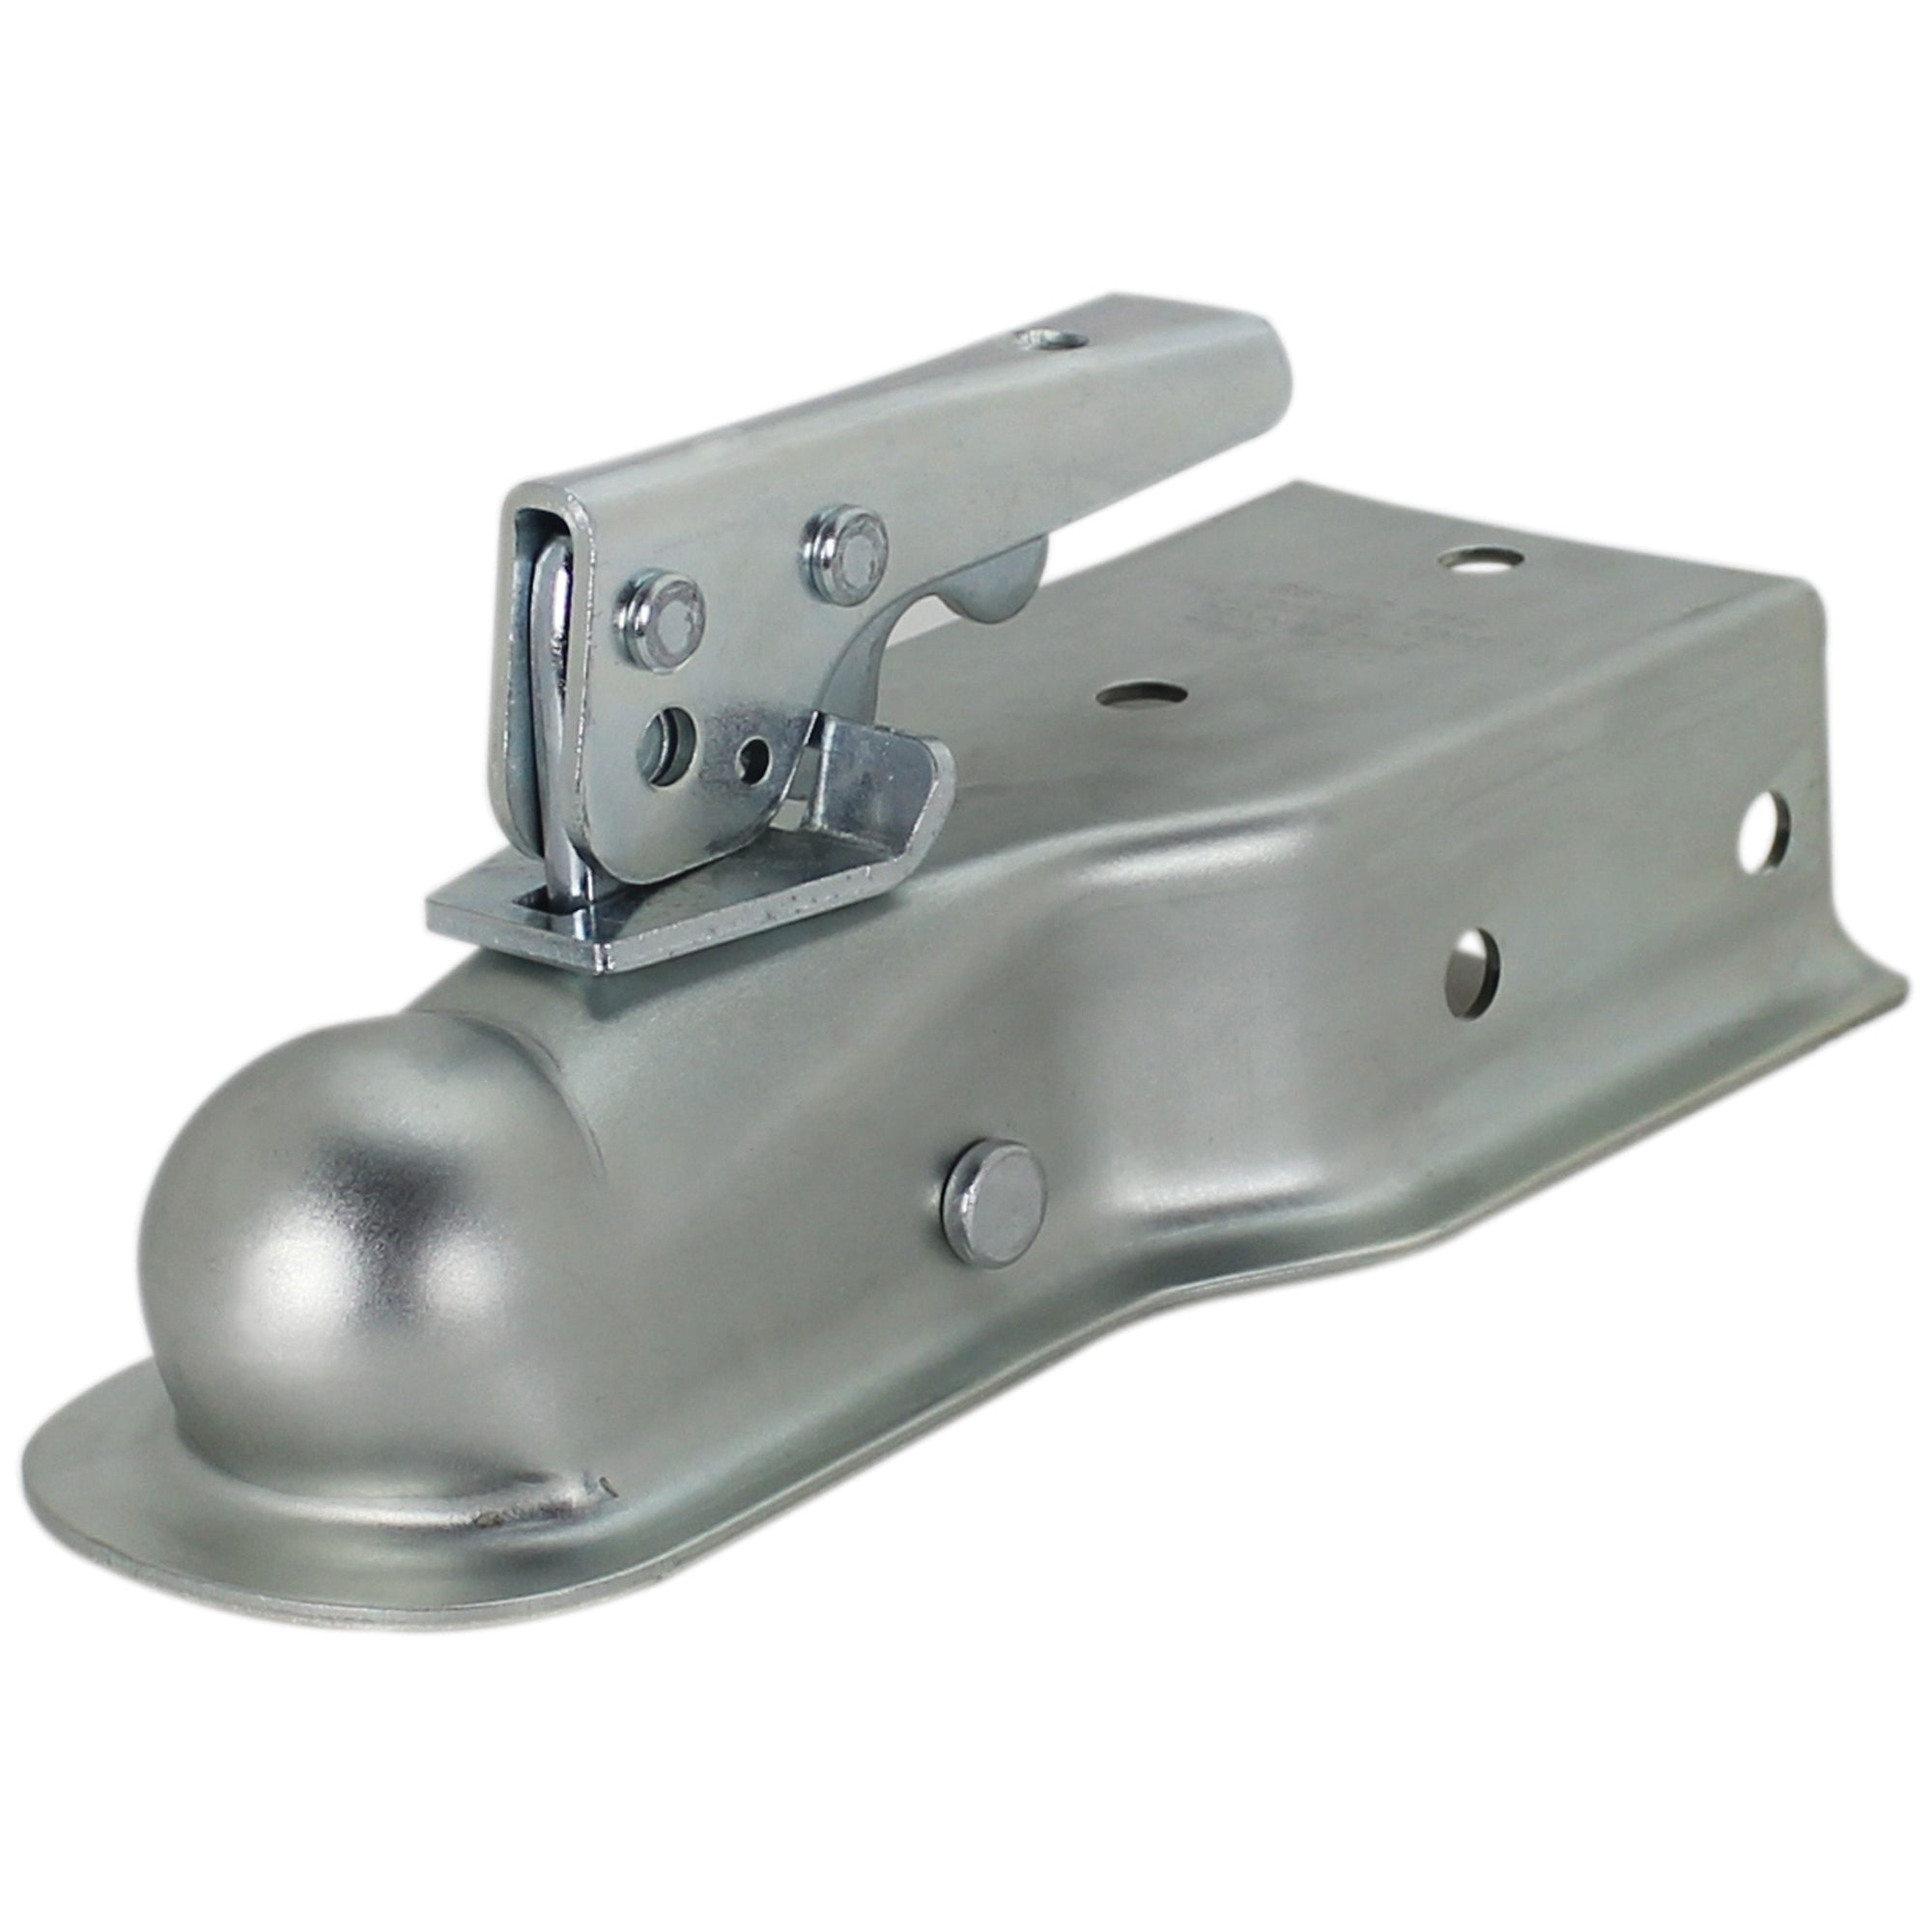 COUPLER 1-7/8 X 3" CHANNEL 2000LBS CHROME PLATED